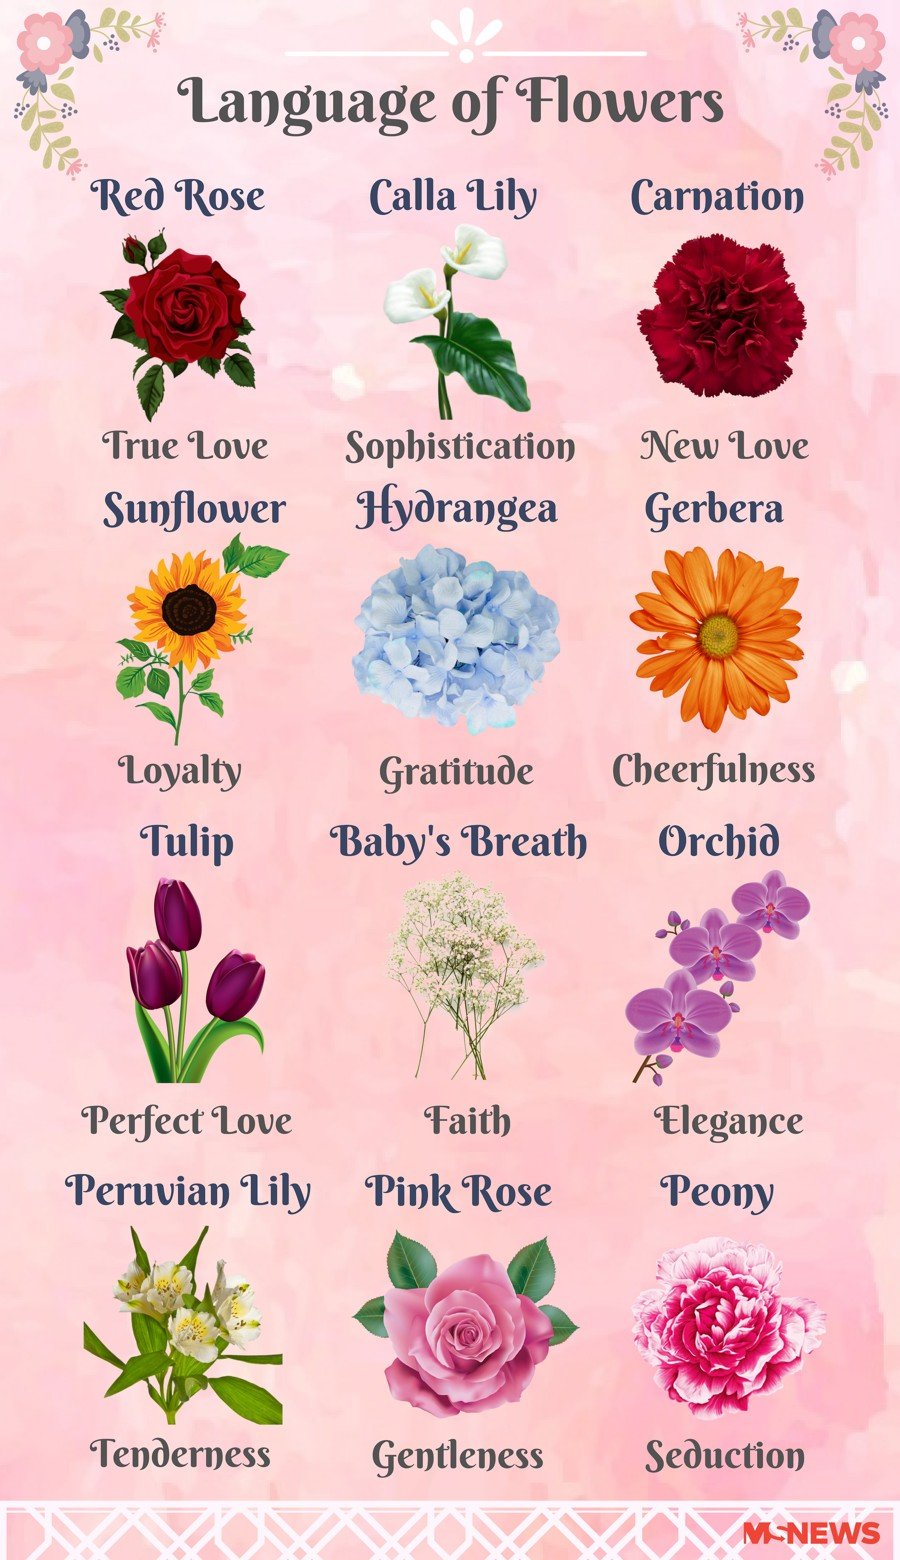 12 Valentine's Day Flower Meanings Explained To Woo Your Boo